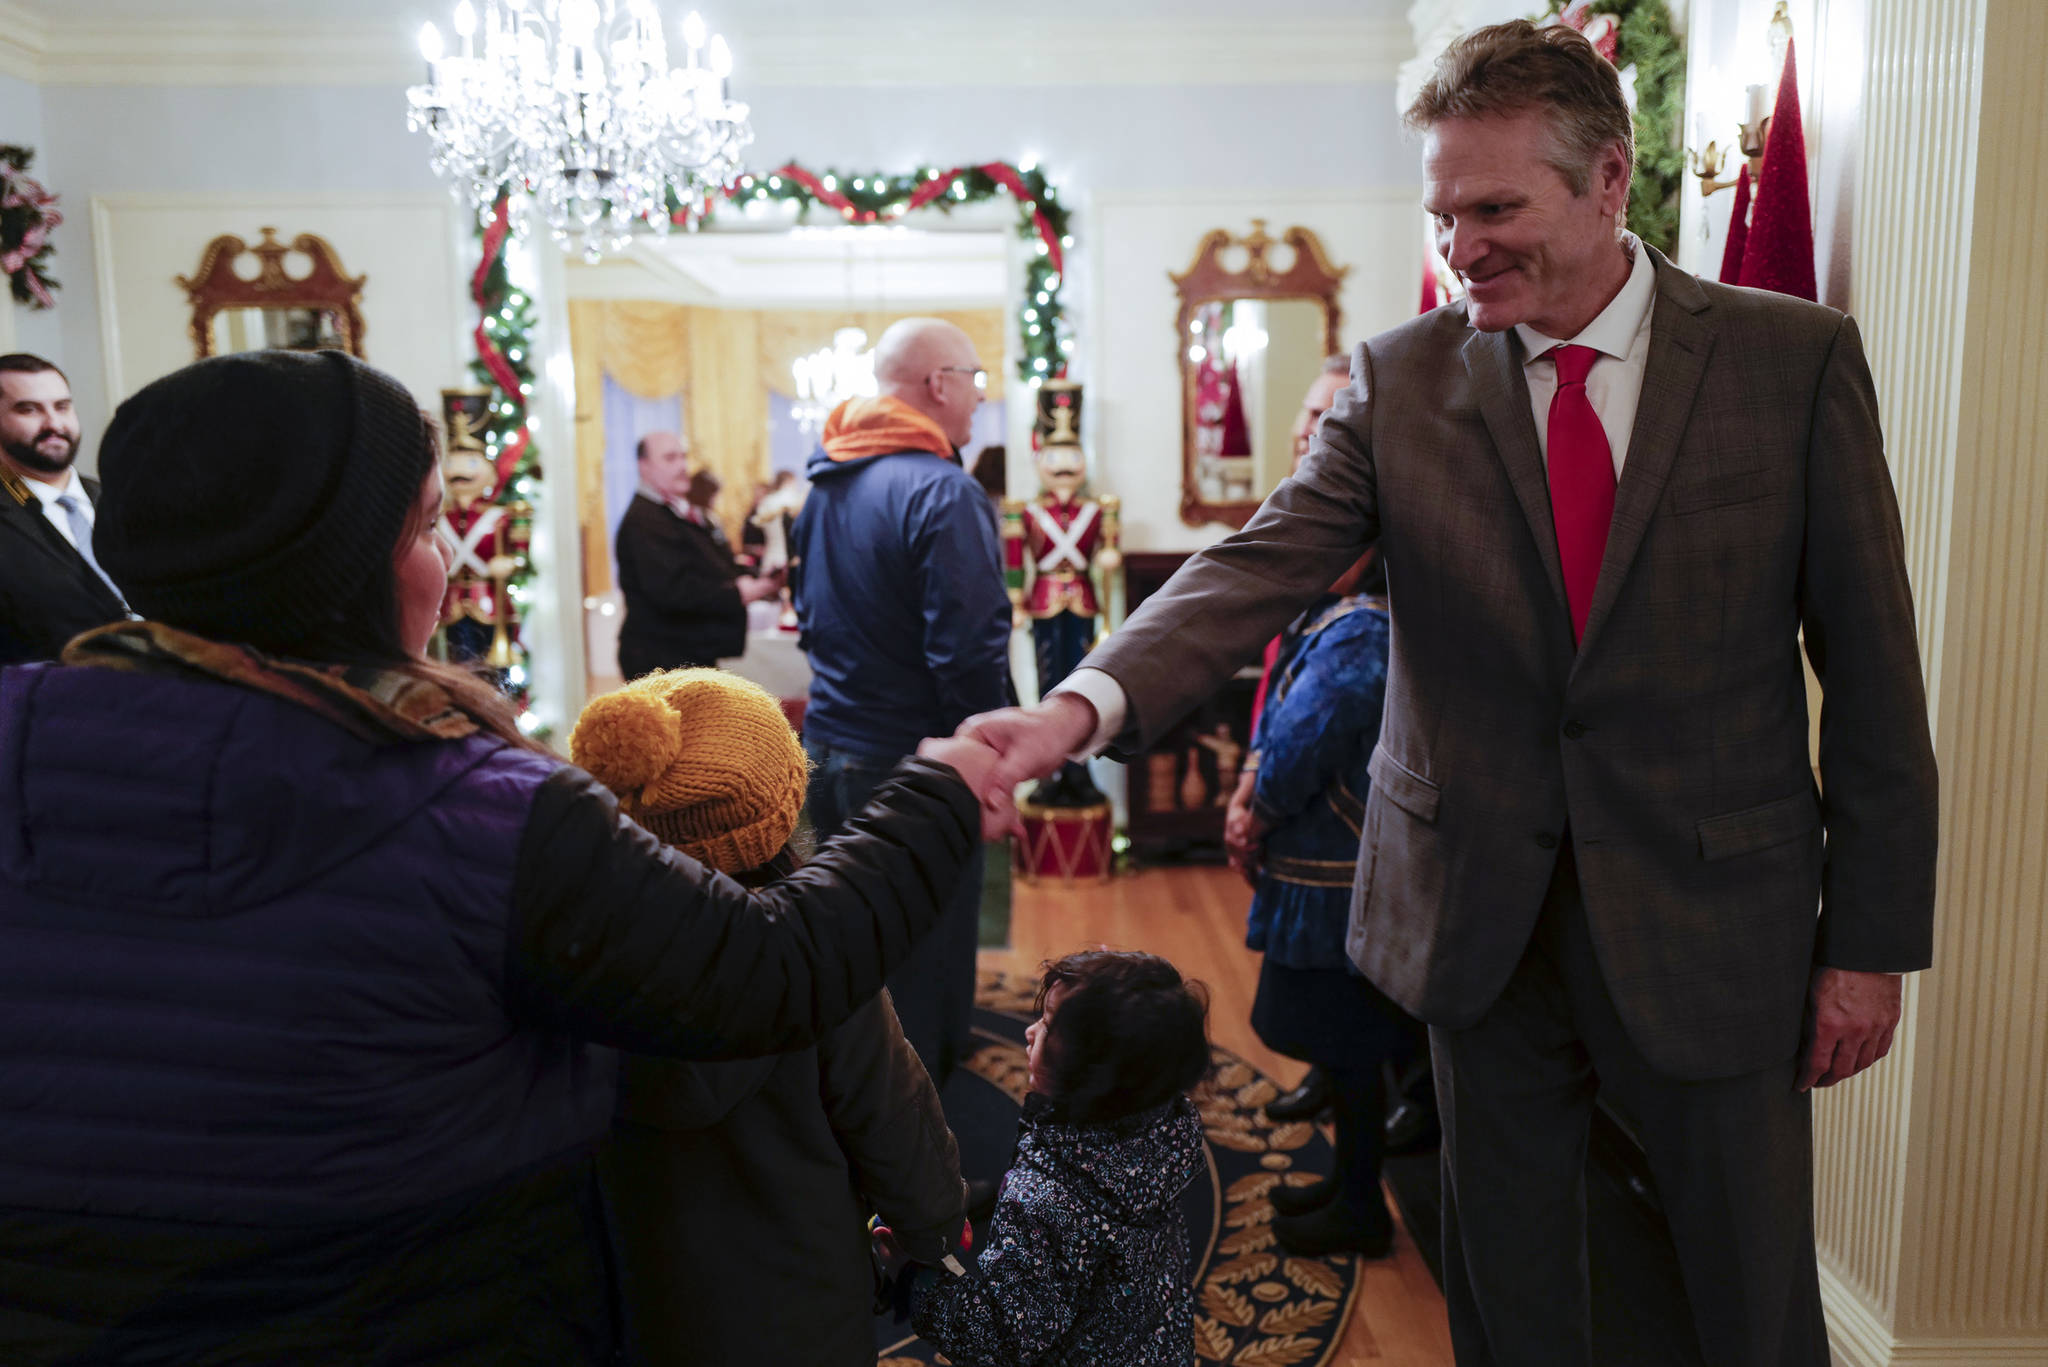 Gov. Mike Dunleavy, R-Alaska, greets Juneau residents at the Governor’s Open House on Tuesday, Dec. 10, 2019. (Michael Penn | Juneau Empire)